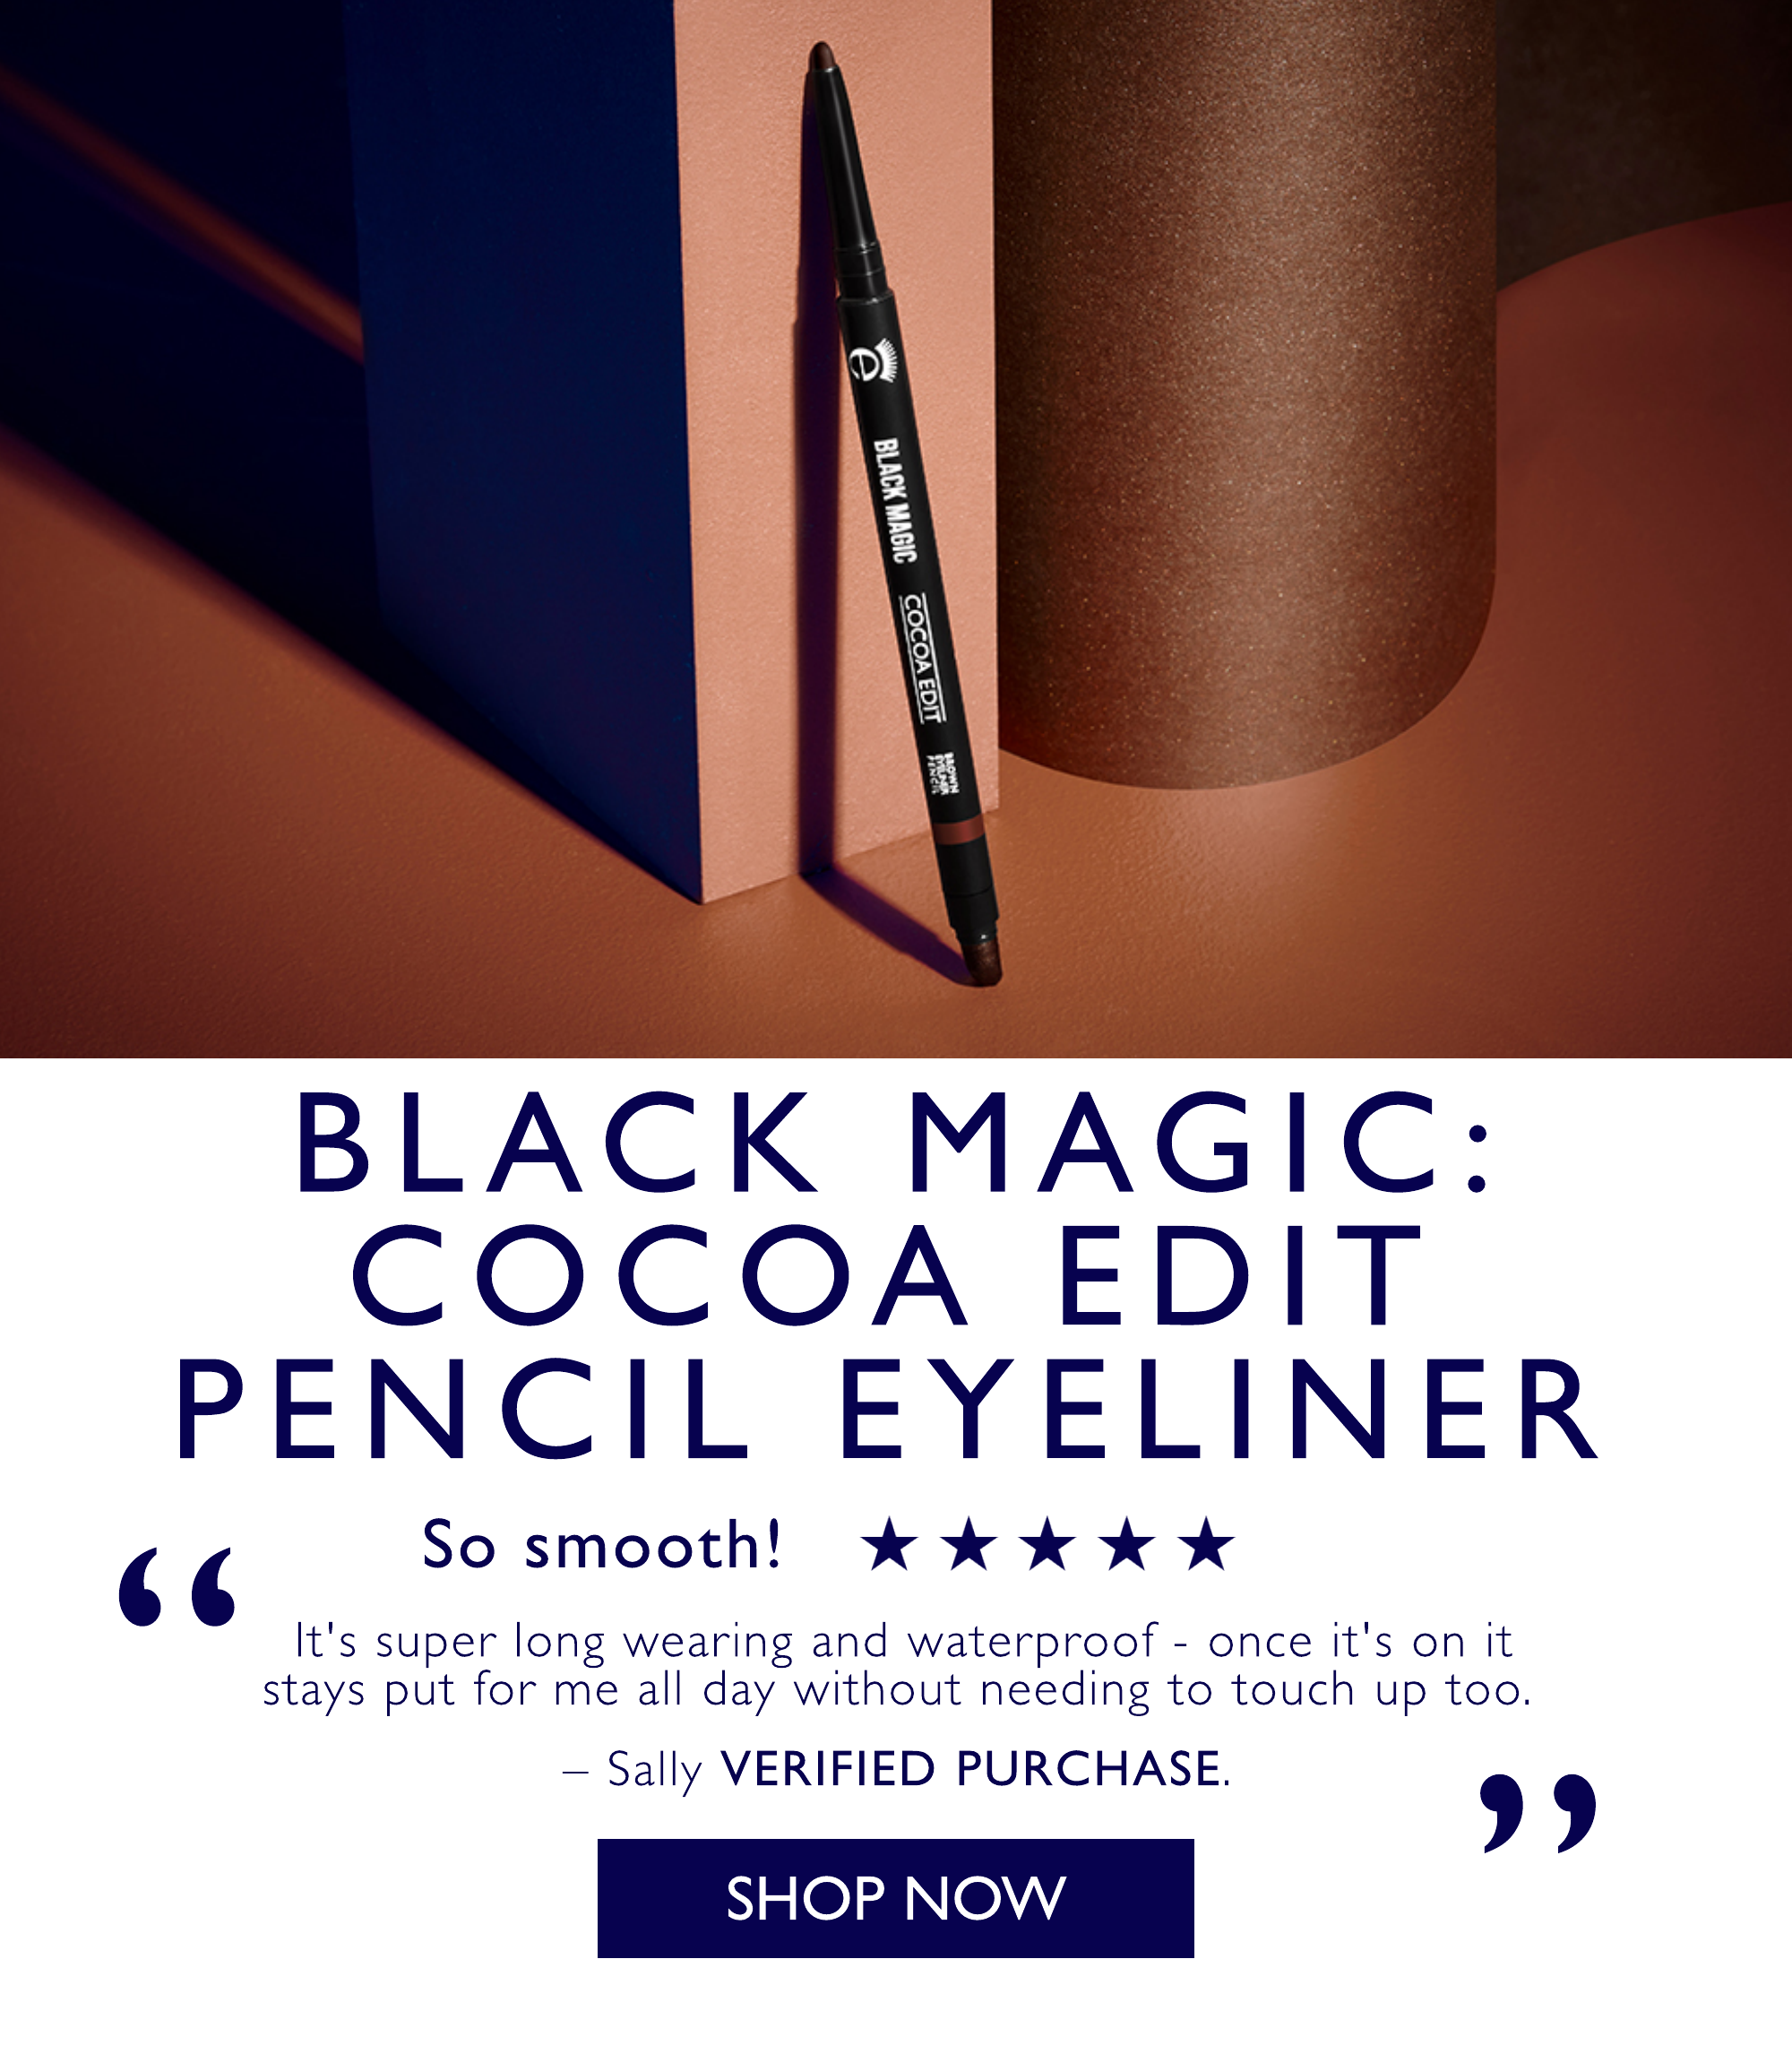 Black Magic Cocoa Edit Eyeliner- So smooth. Click to shop now